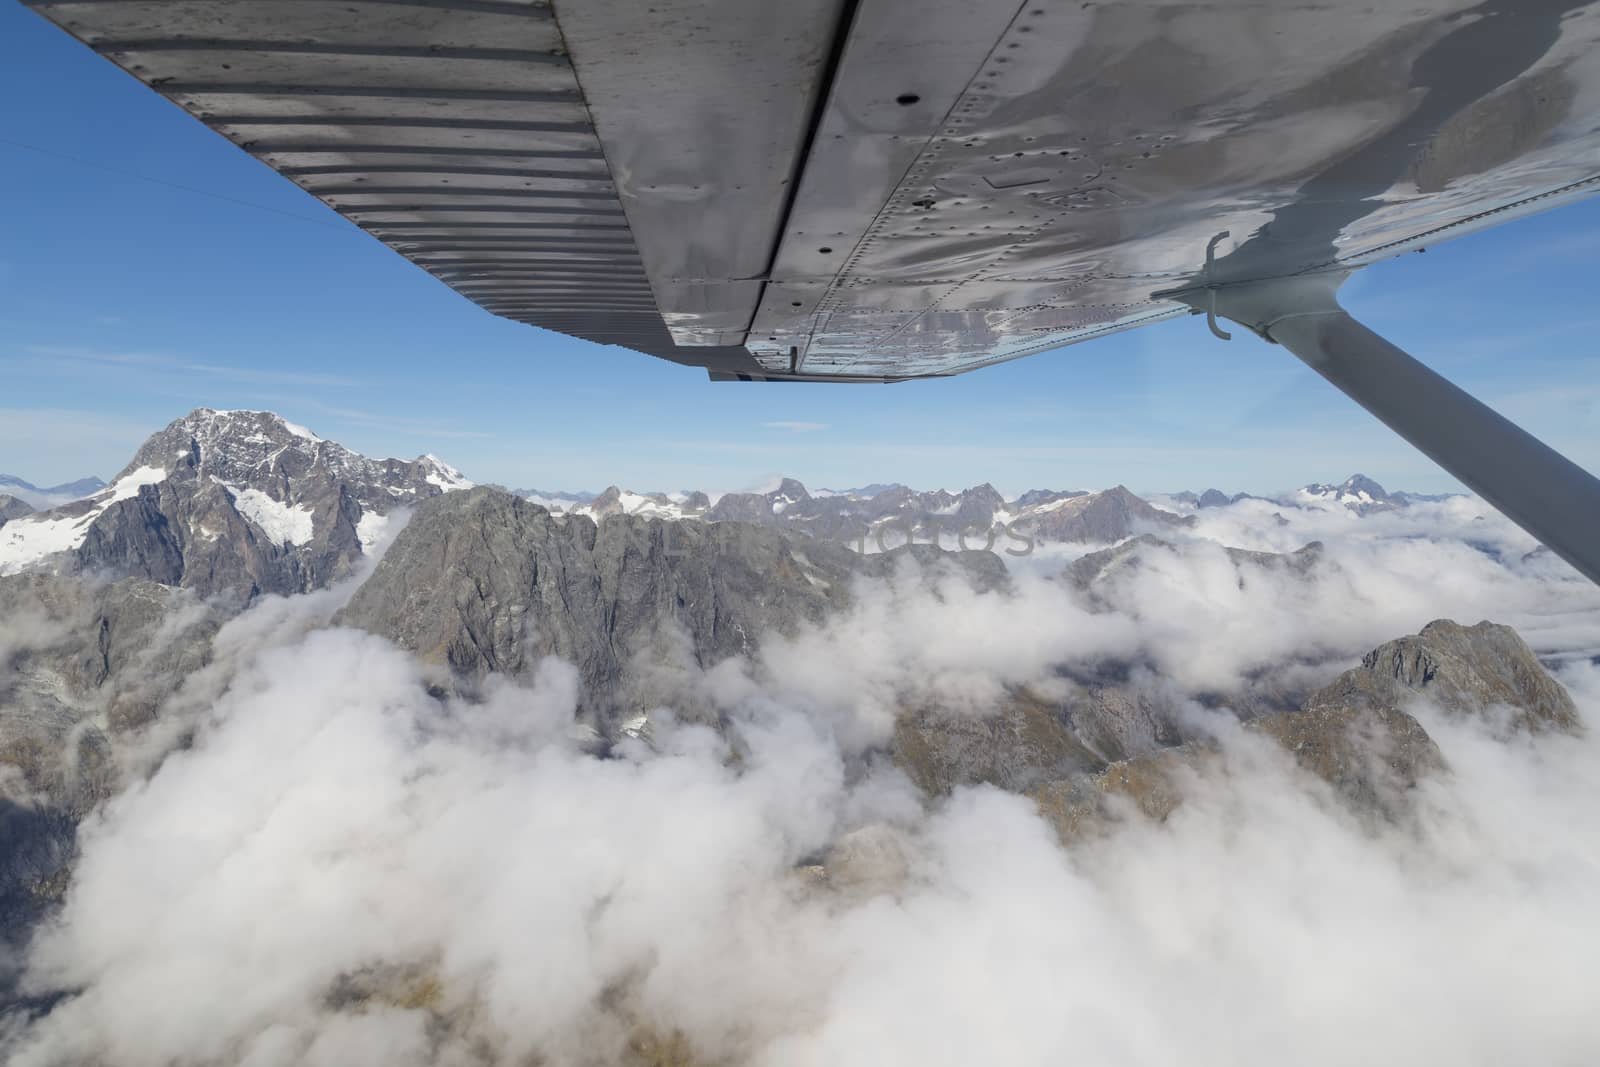 Aerial view of the mountains of Mount Aspiring National Park on the South Island in New Zealand.